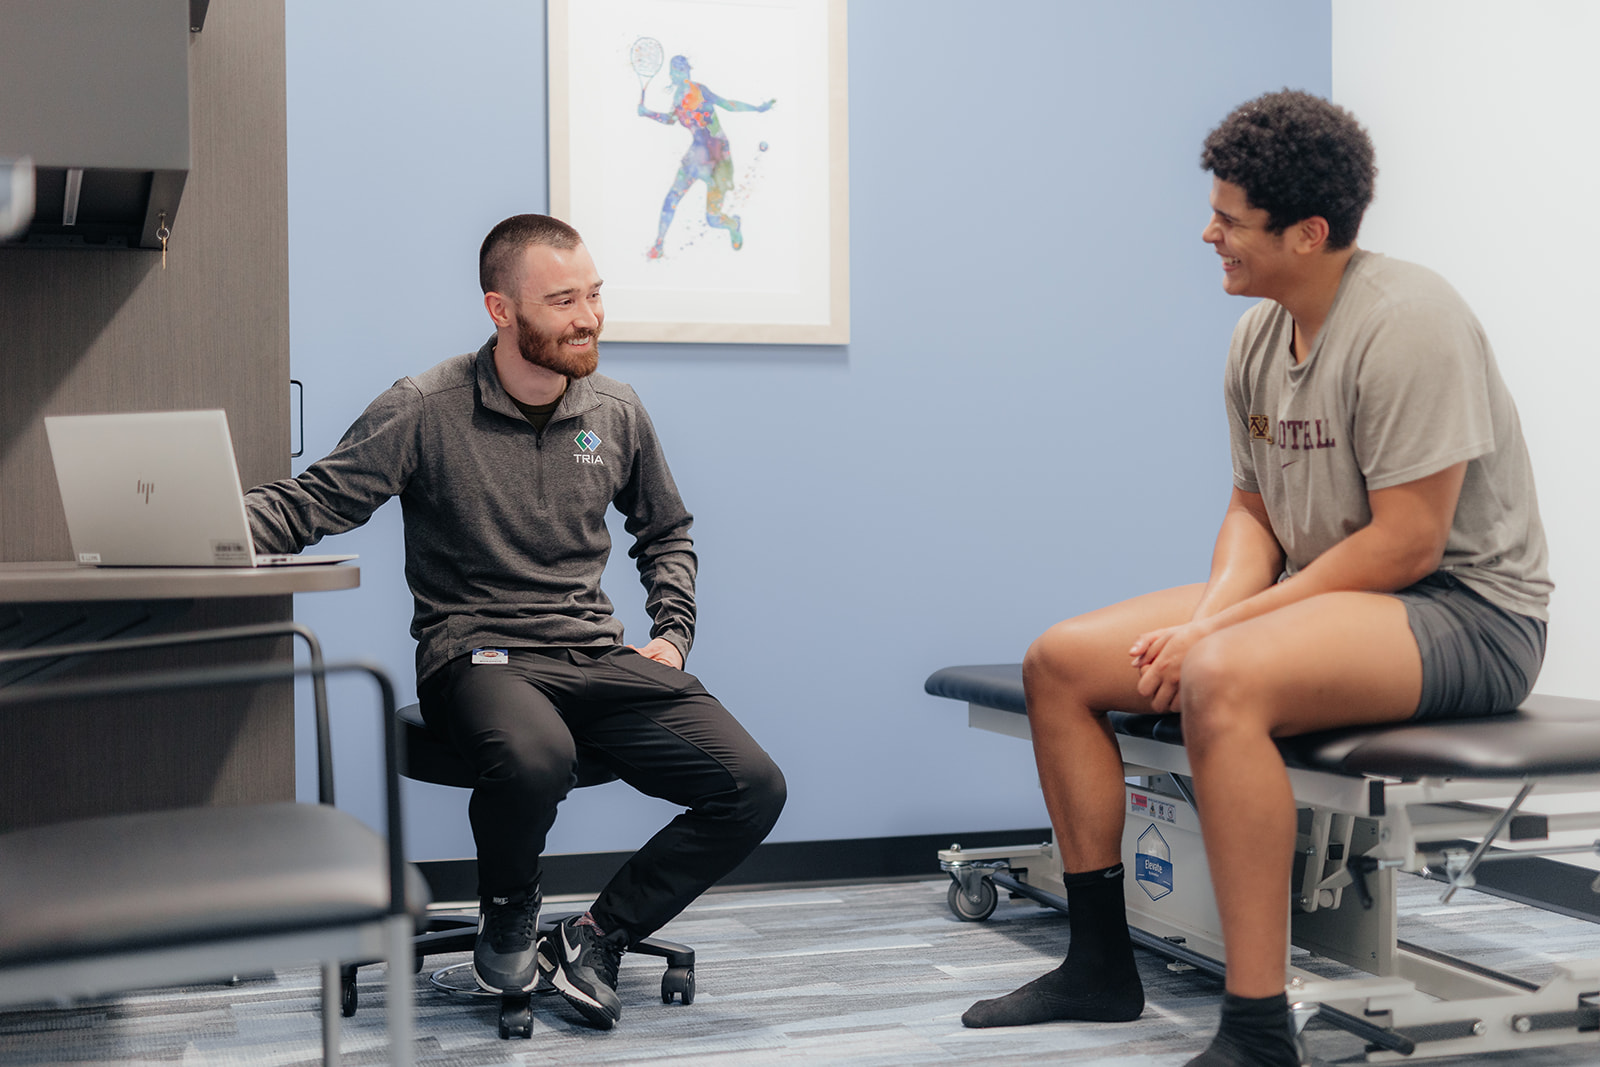 A physical therapist evaluates his client.